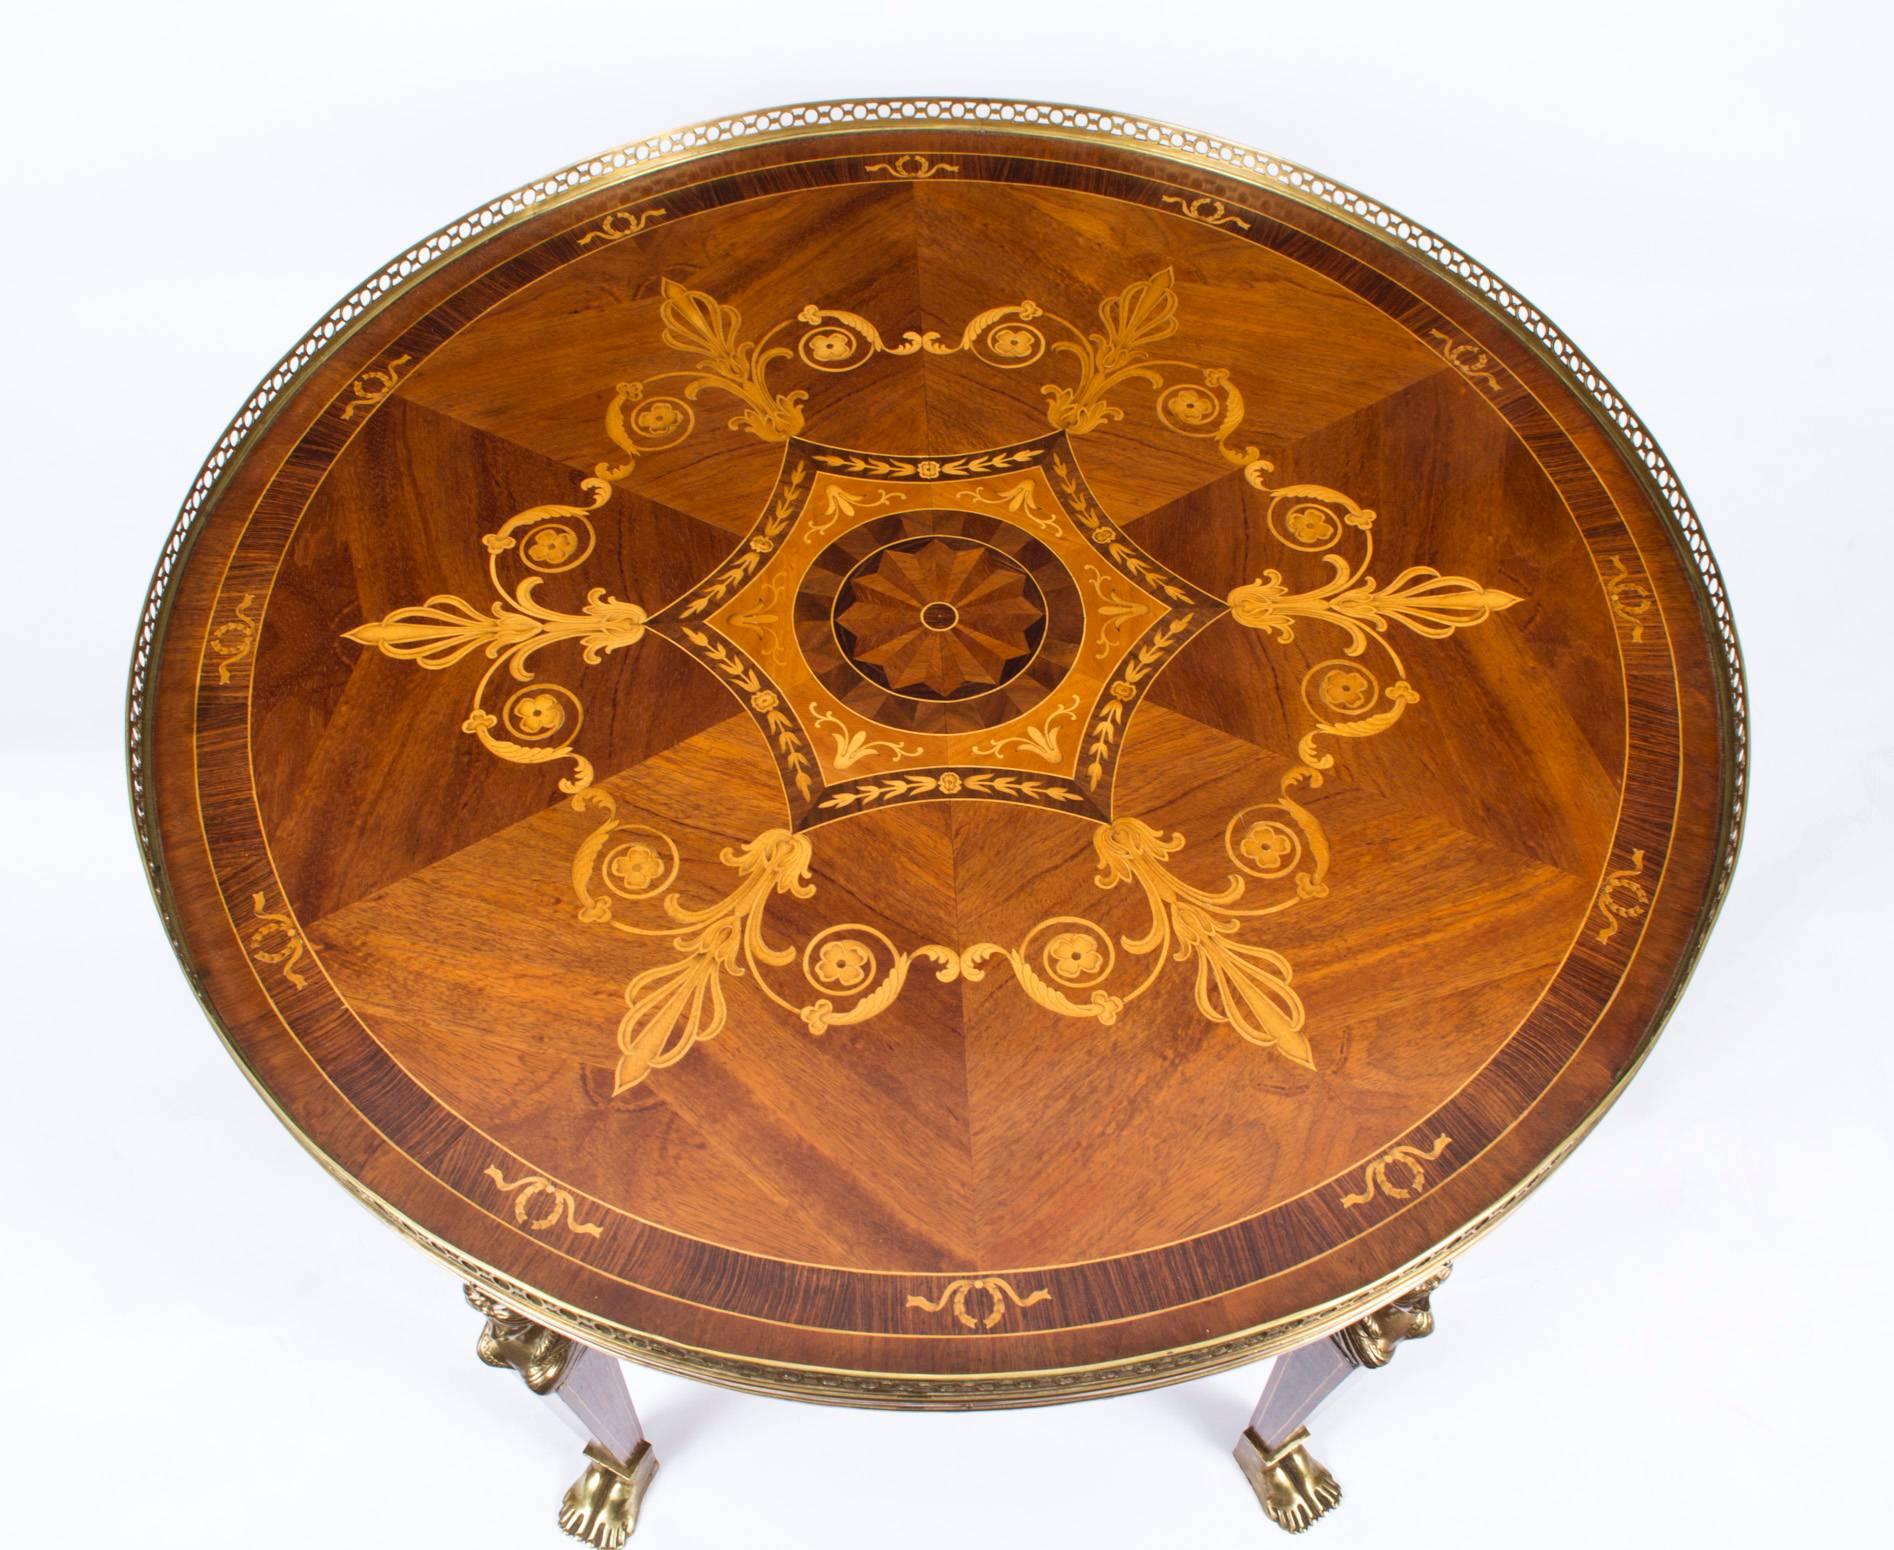 This is a striking vintage mahogany and inlaid marquetry coffee table in the elegant Empire style with fabulous decorative ormolu mounts and pierced brass gallery, circa 1970 in date.

Bought from a beautiful country house in Wales, the owners had